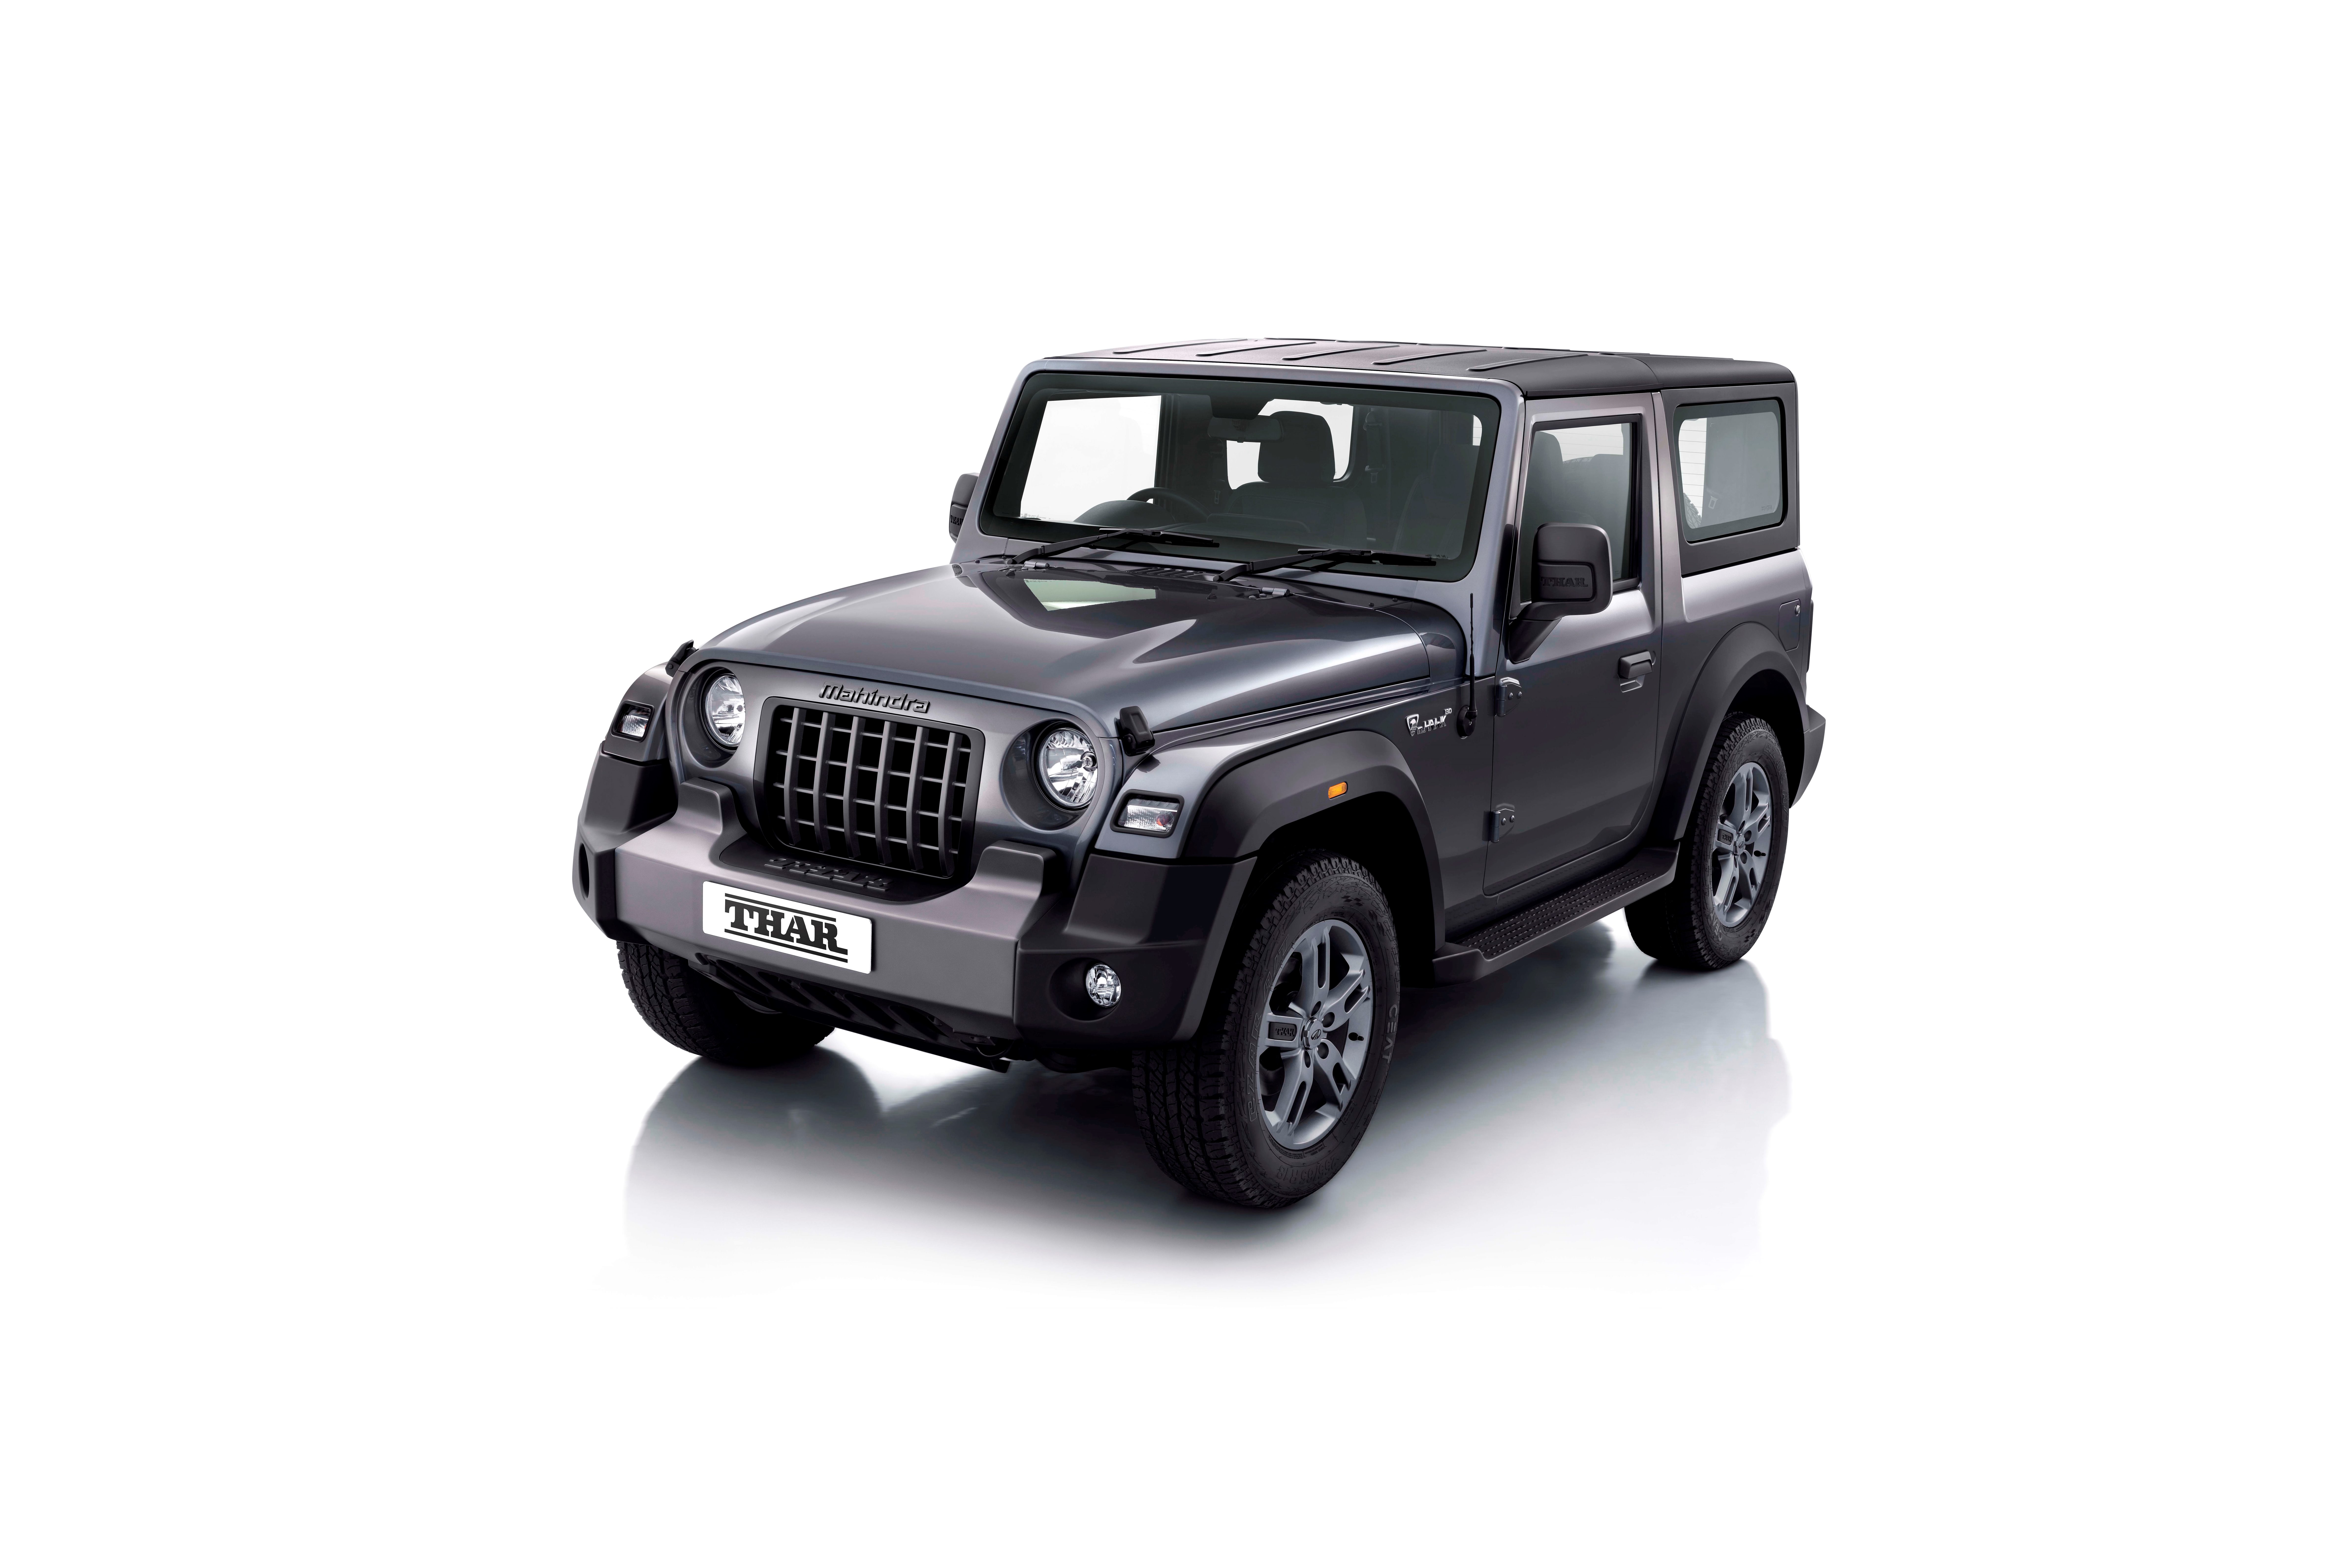 The All-New Thar Celebrated Its Launch Anniversary with 75000 Bookings decoding=